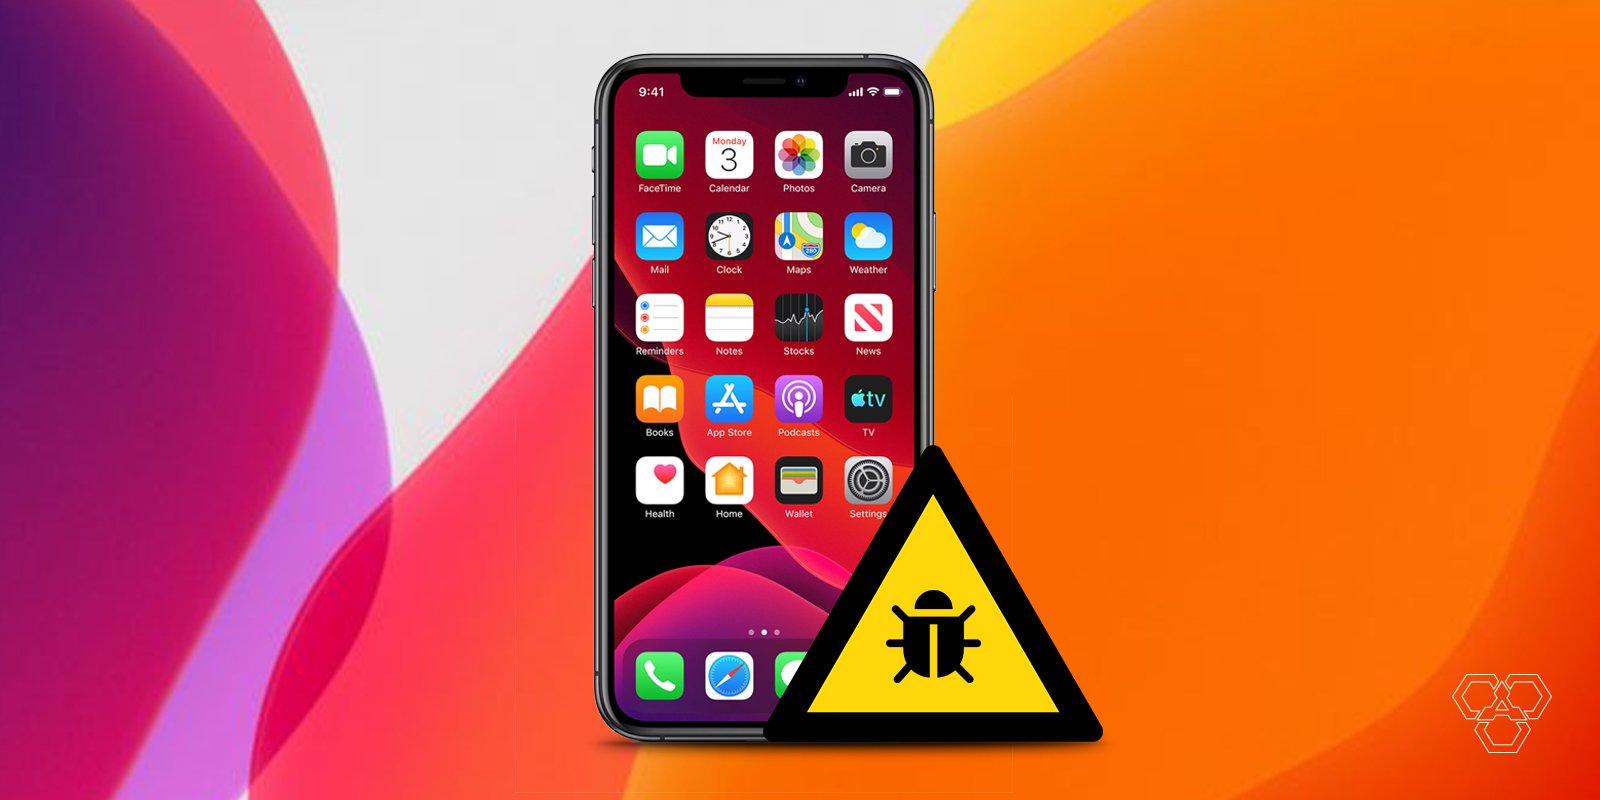 All iOS 13 bugs and crashes